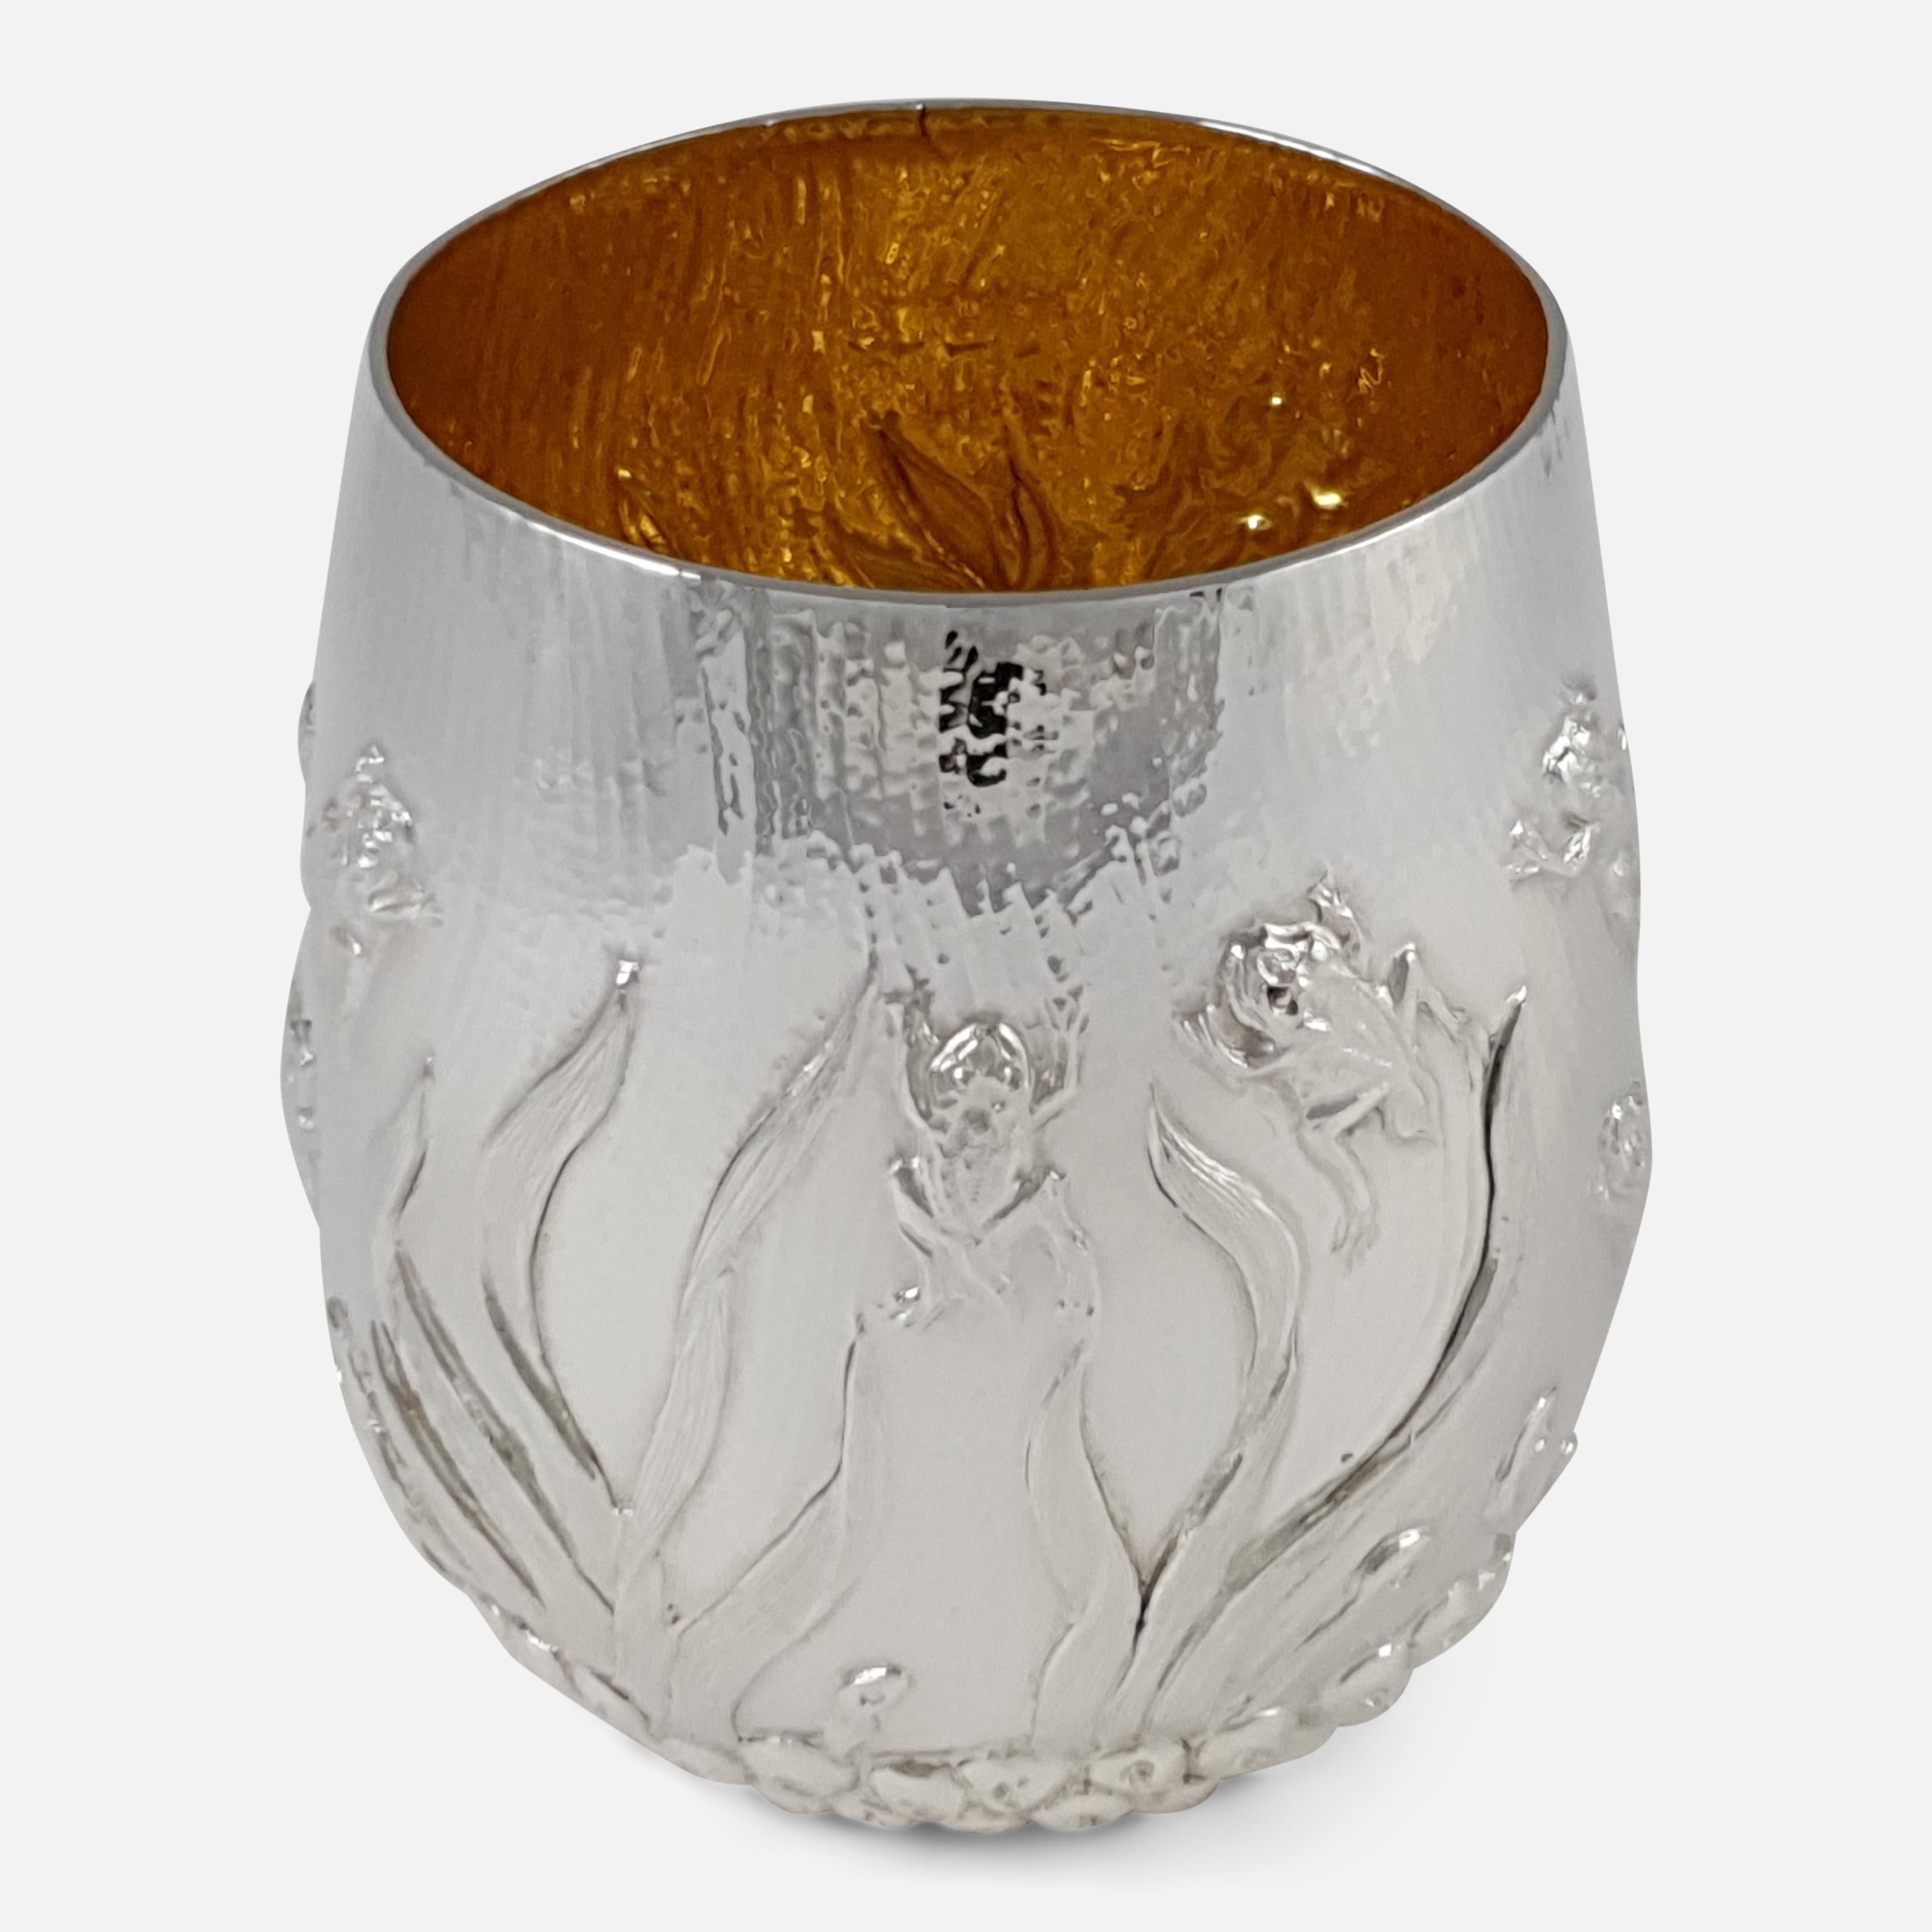 An Elizabeth II sterling silver gilt beaker made by Garrard & Co. Limited. The beaker, with gilt wash interior, is of tapering cylindrical design, depicting a chased scene of frog spawn to the base, leading to tadpoles and frogs emerging swimming